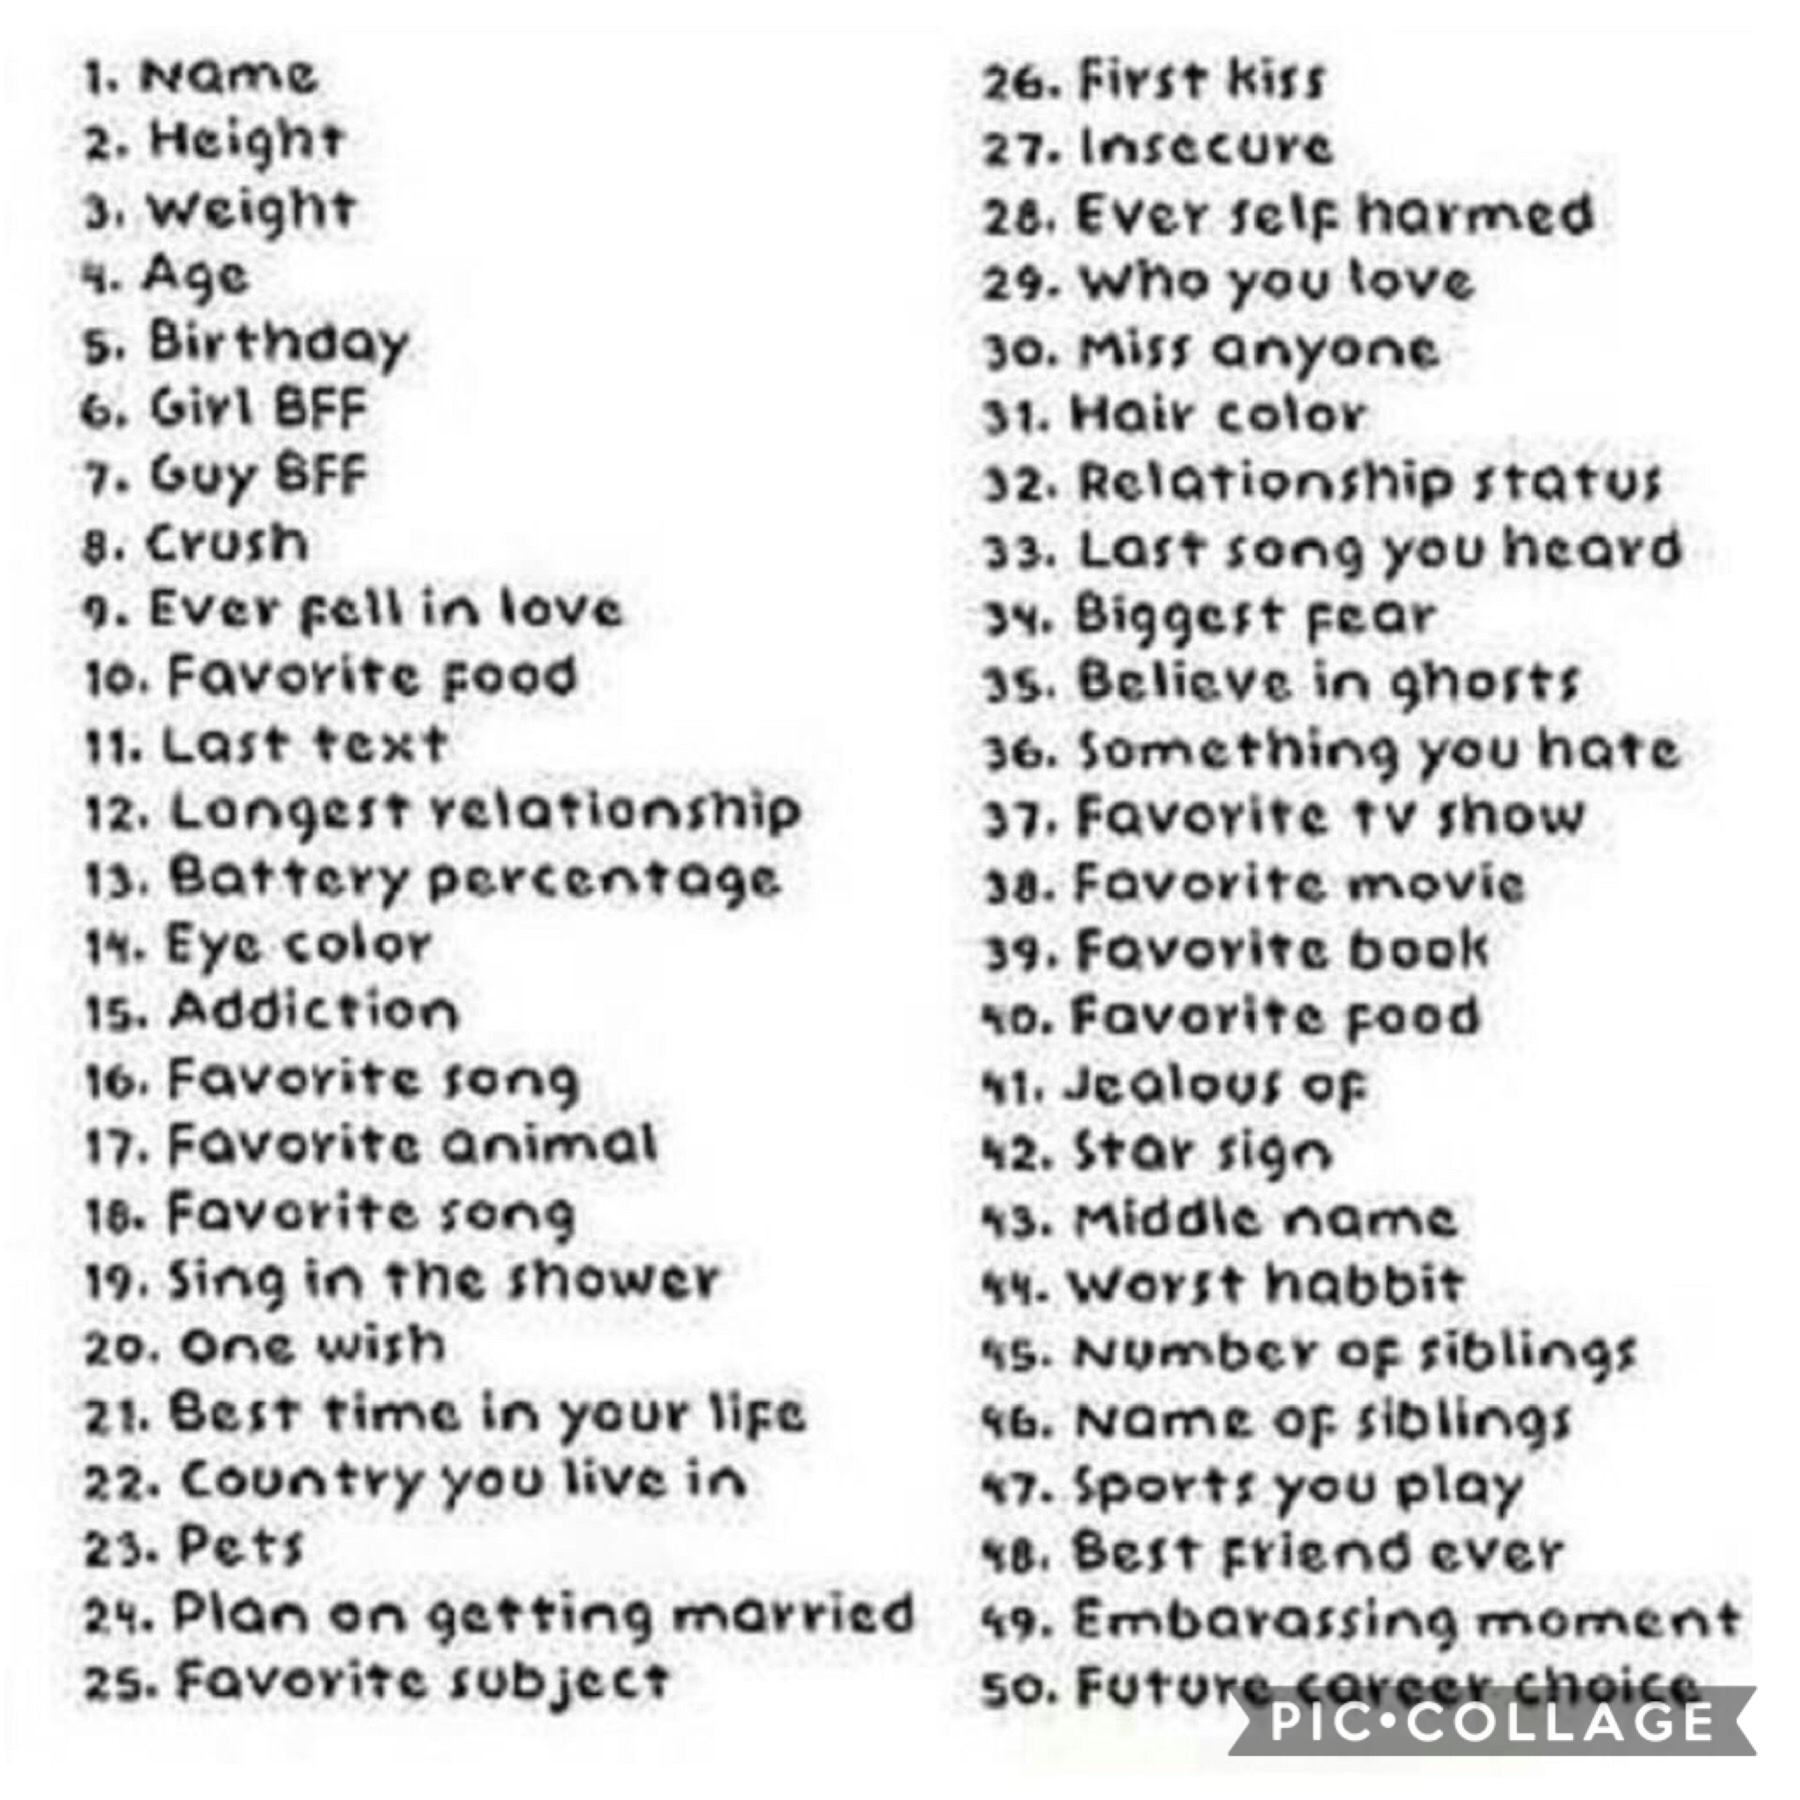 Ask me any number and I’ll be truthful (tap for nothing)









































I told u it was nothing, why did u tap?? 